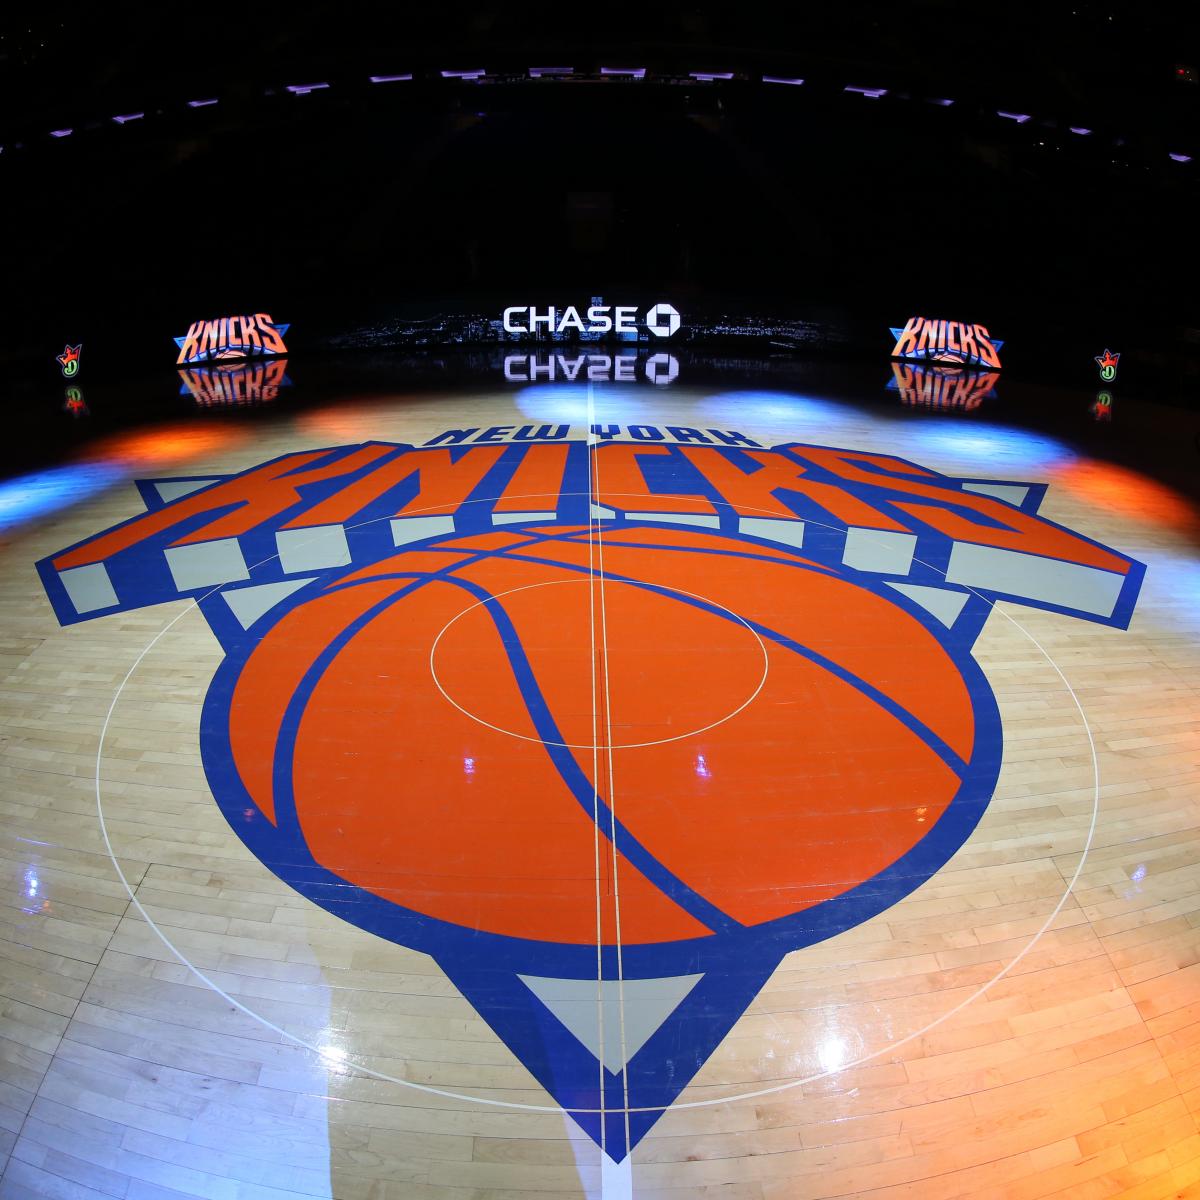 Knicks Team Up With Squarespace for Patch Sponsorship Deal - Bloomberg